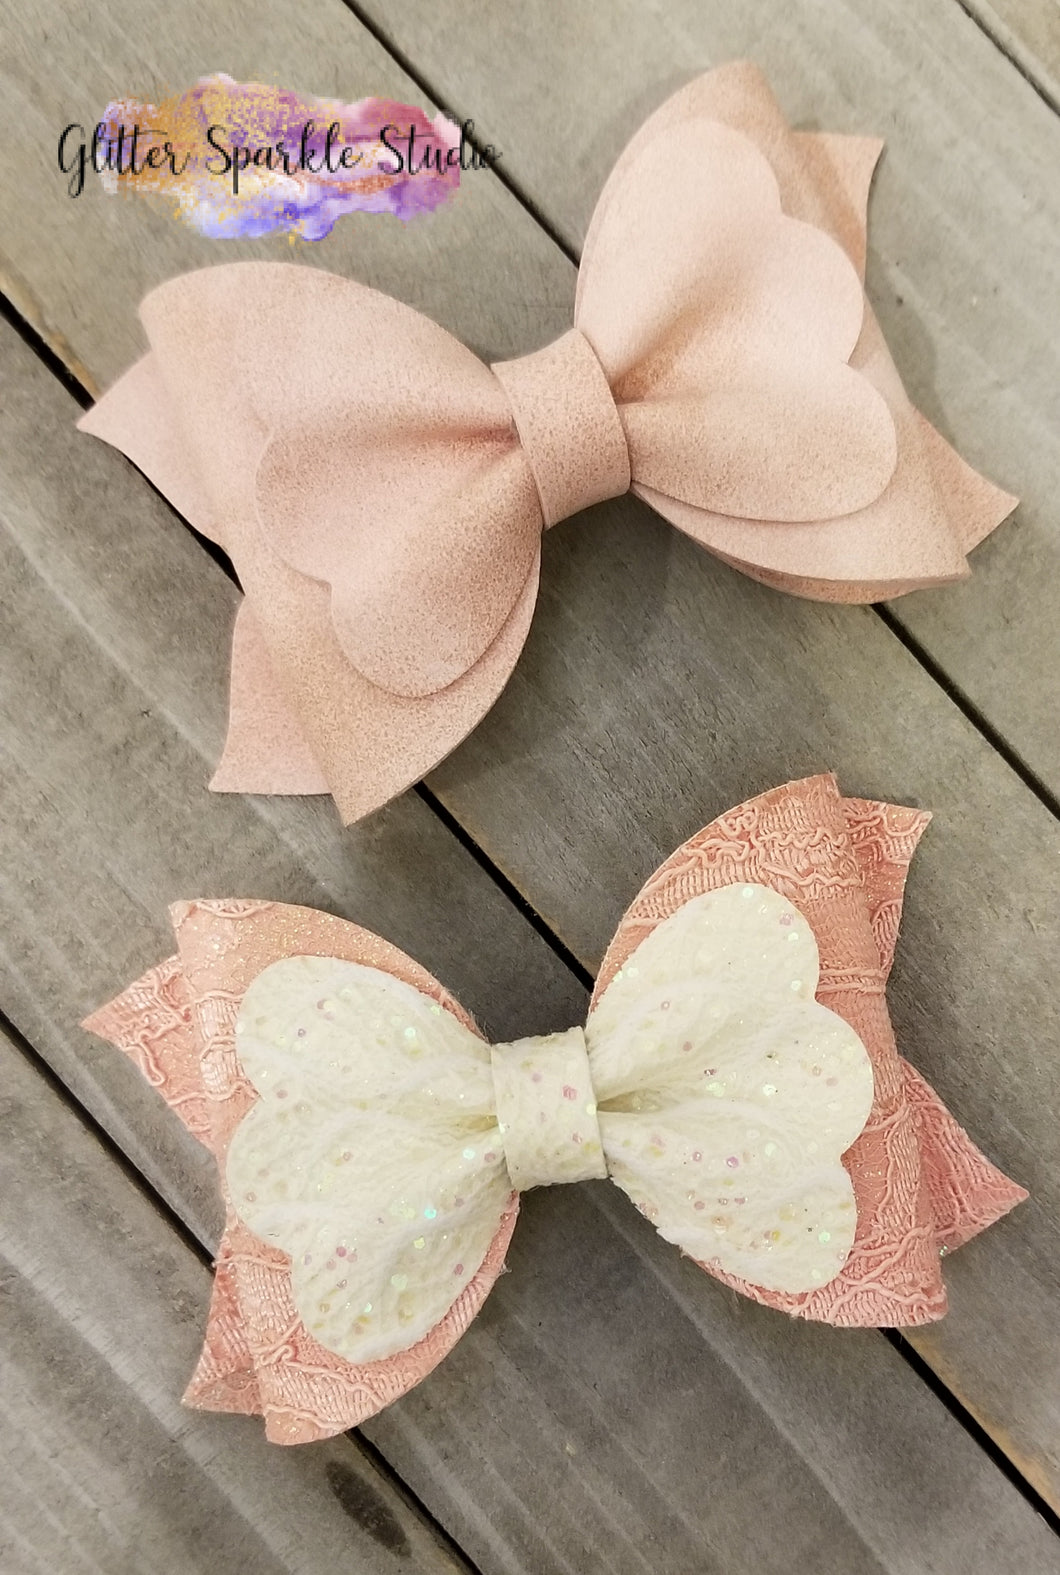 All full cuts - 5 inch Layered Lacey Bow Steel Rule Die